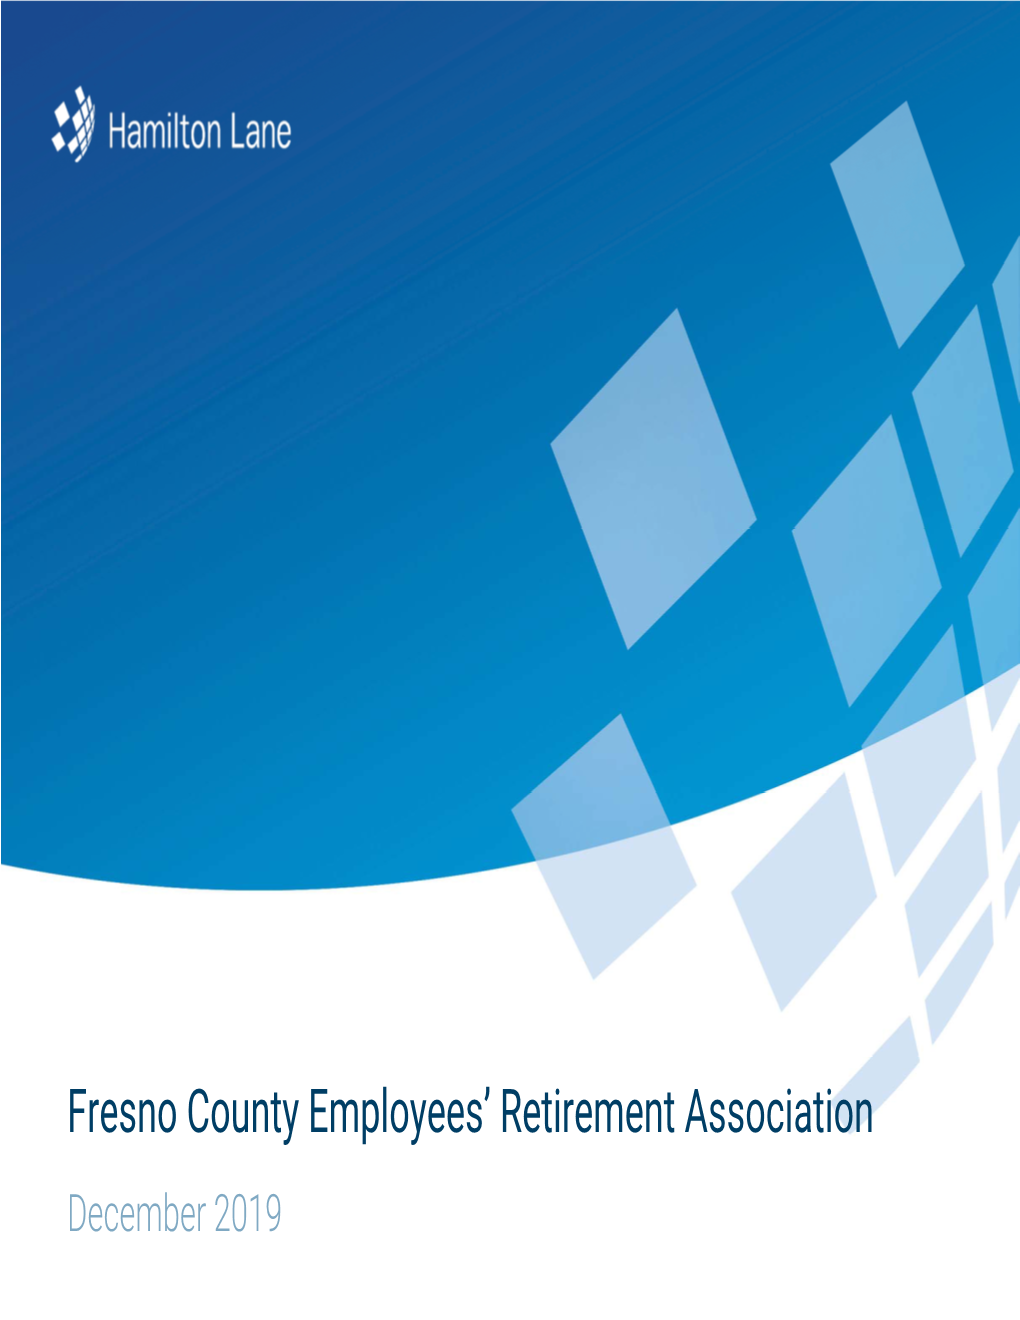 Fresno County Employees' Retirement Association Portfolio Performance Summary by Investment As of June 30, 2019